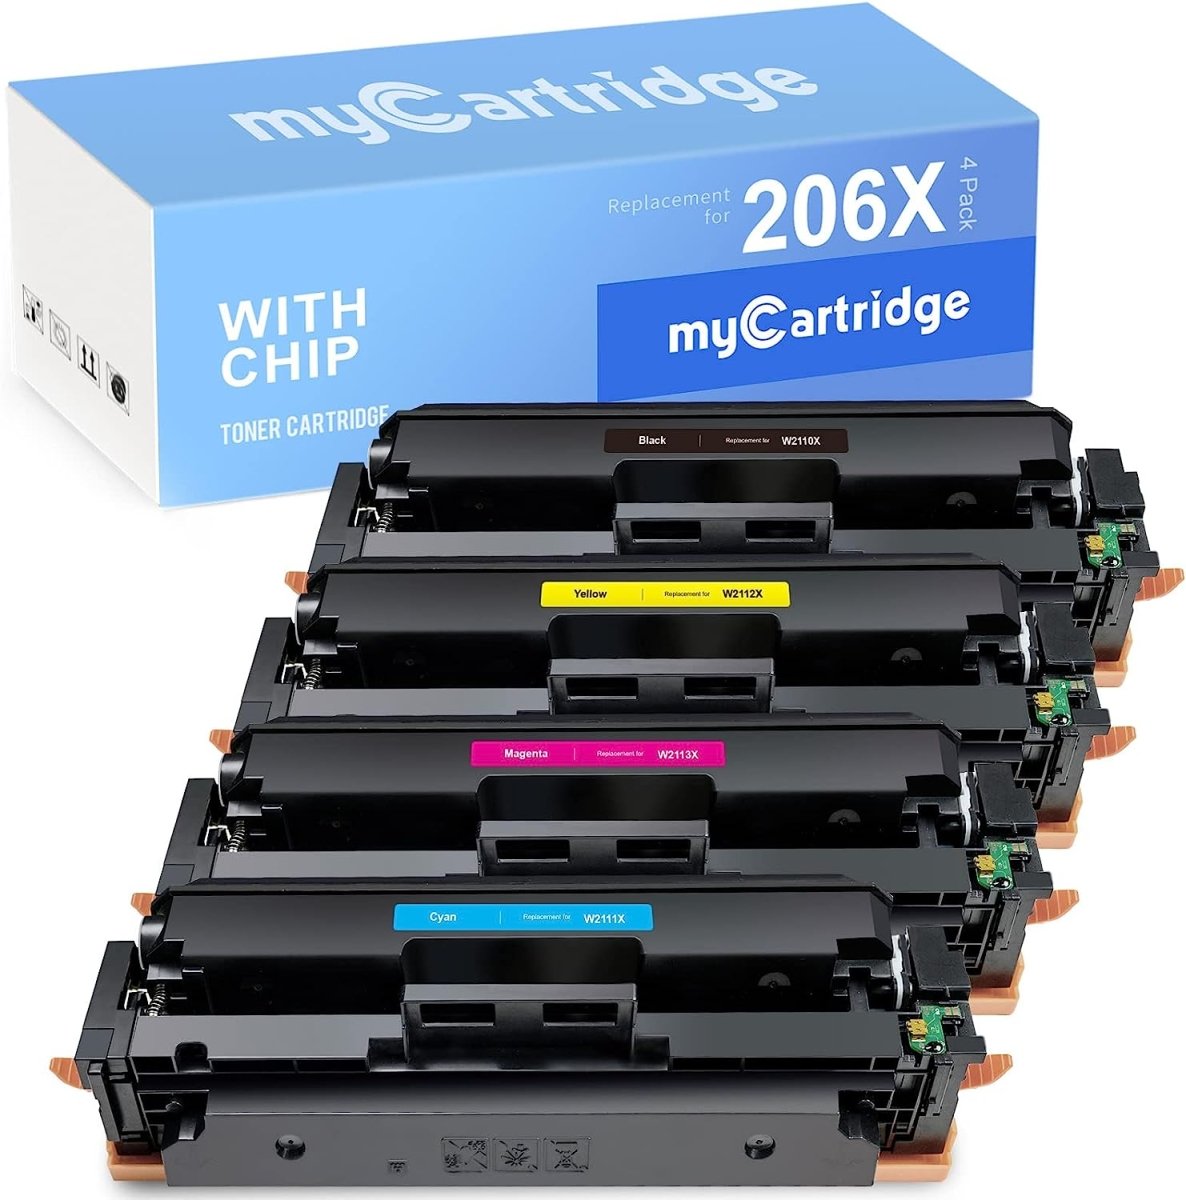 HP 206X toner cartridges 4 pack high yield with chip compatible HP 206A printers